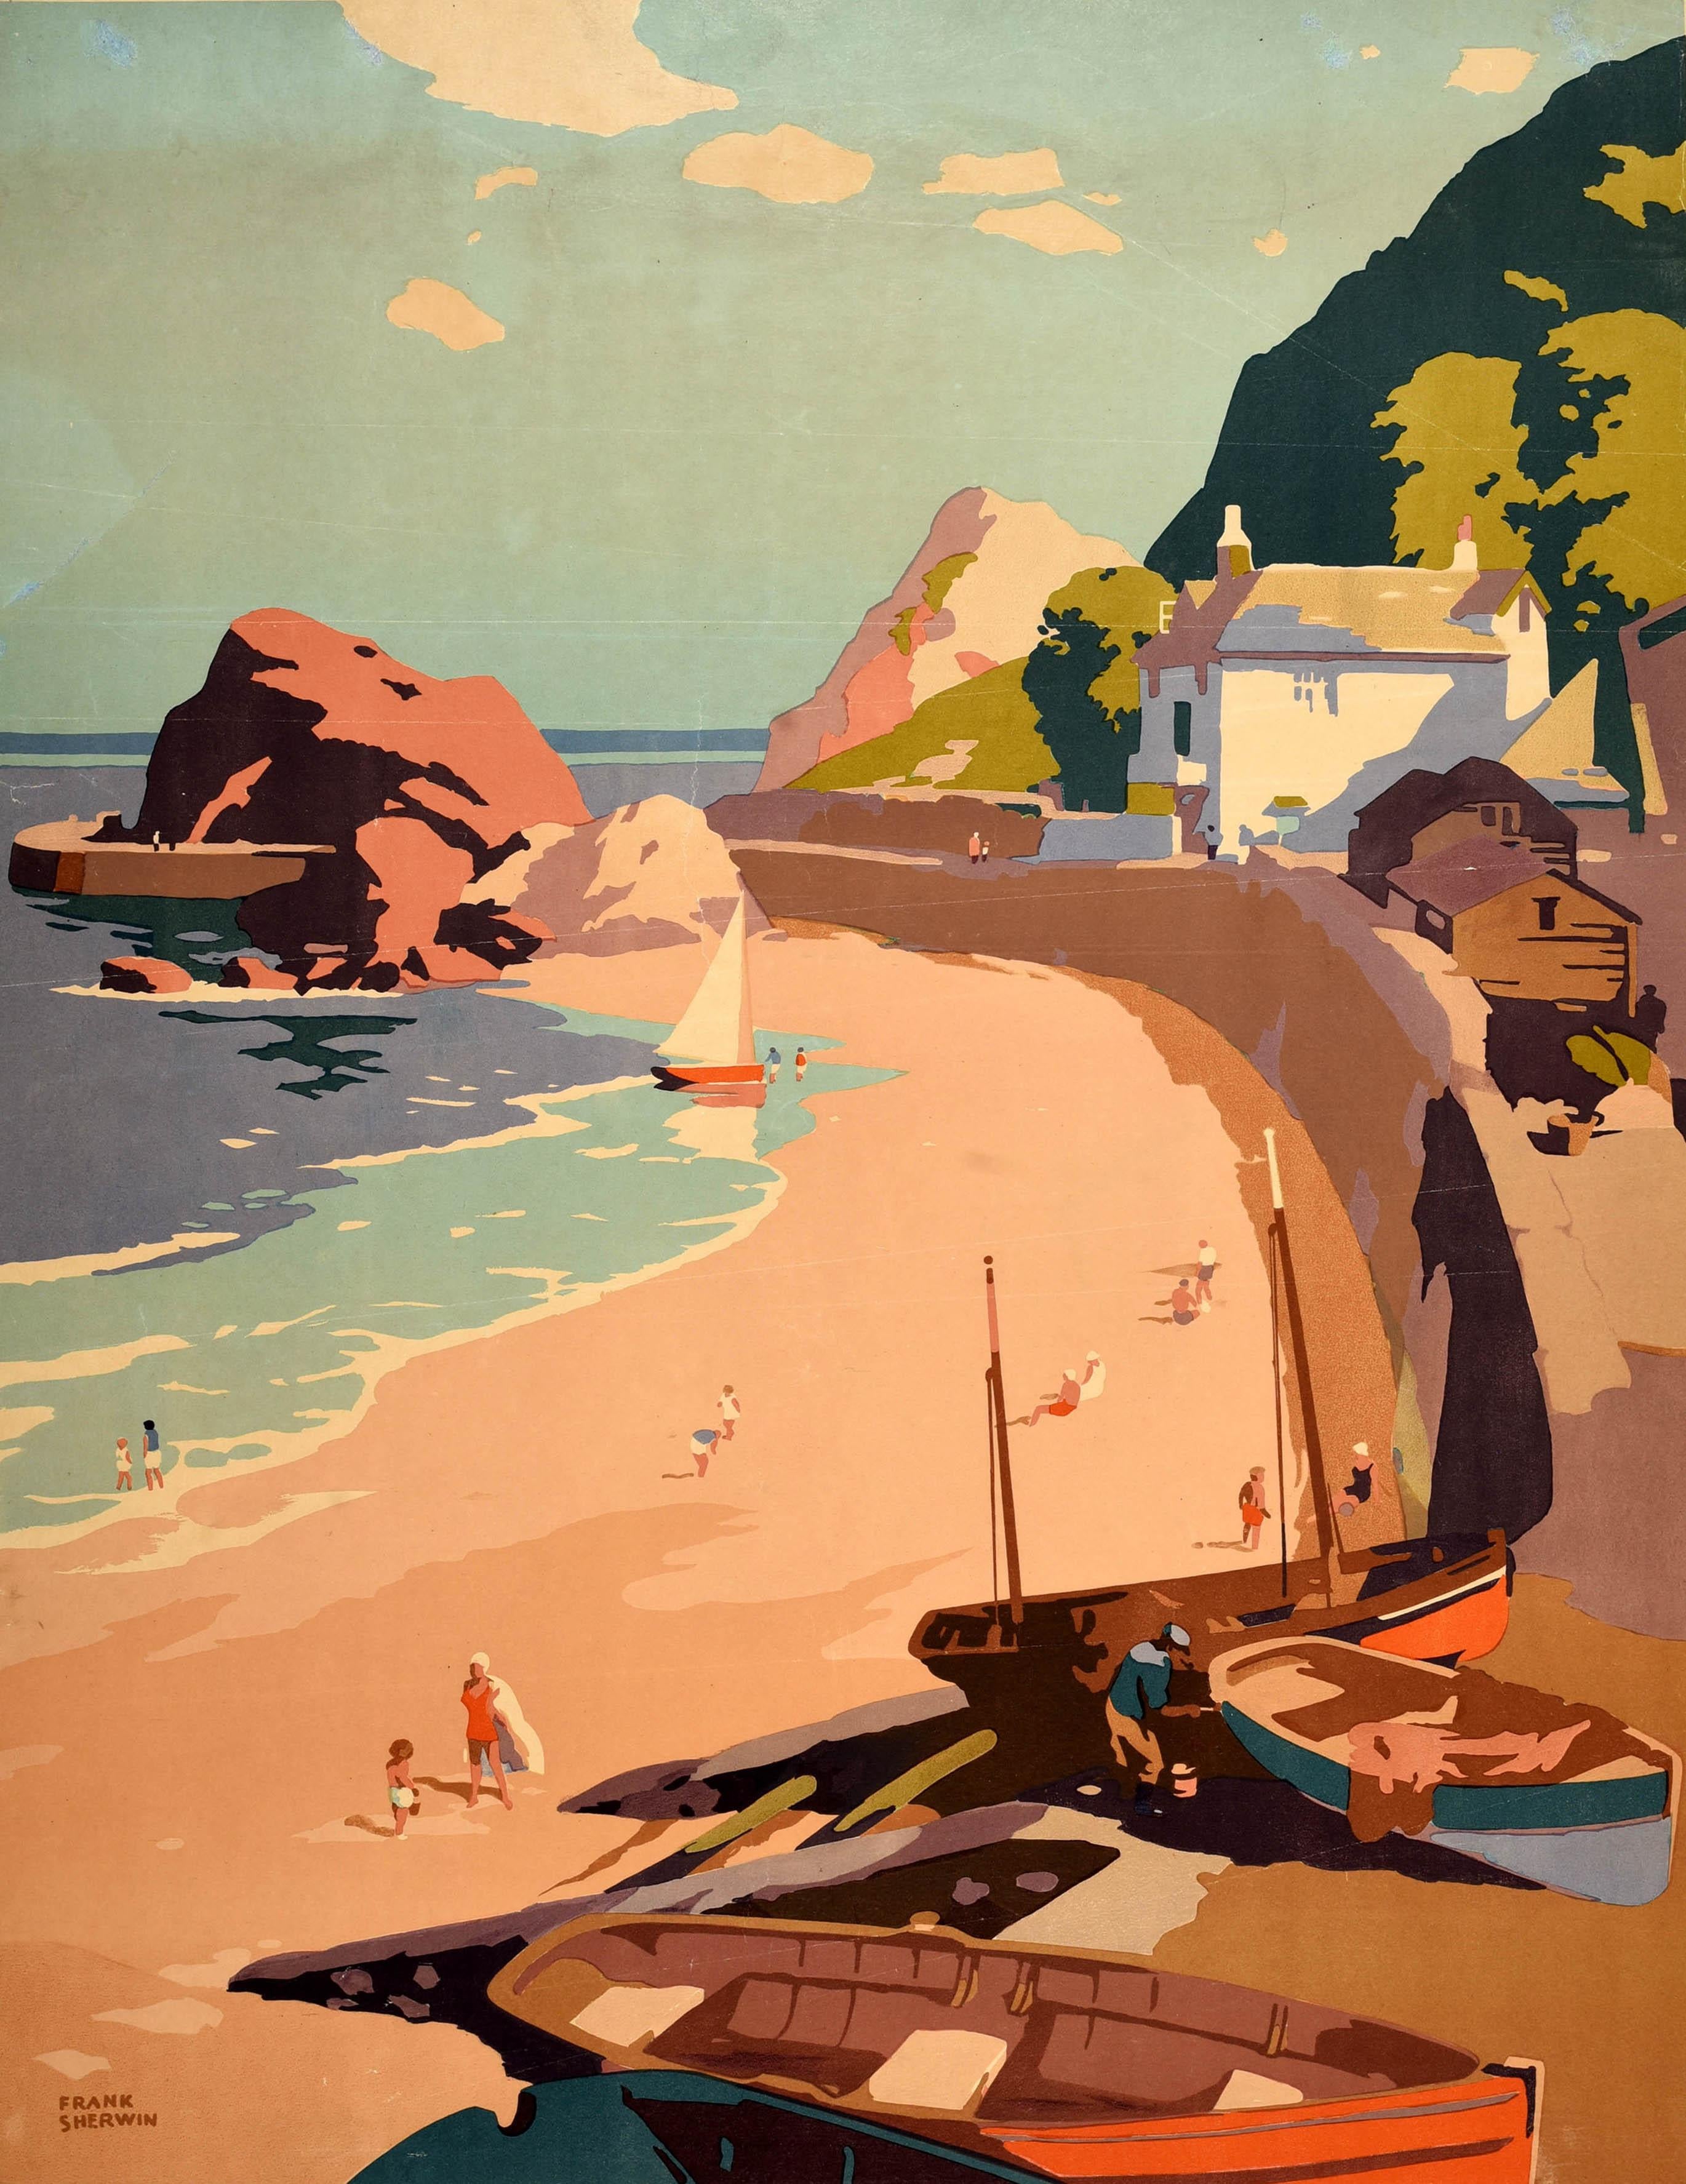 Original vintage railway travel poster for Devon issued by Great Western Railway GWR featuring a great illustration by the notable British poster artist Frank Sherwin (1896-1996) of a beach in Devon with fishing boats in the foreground and a sailing